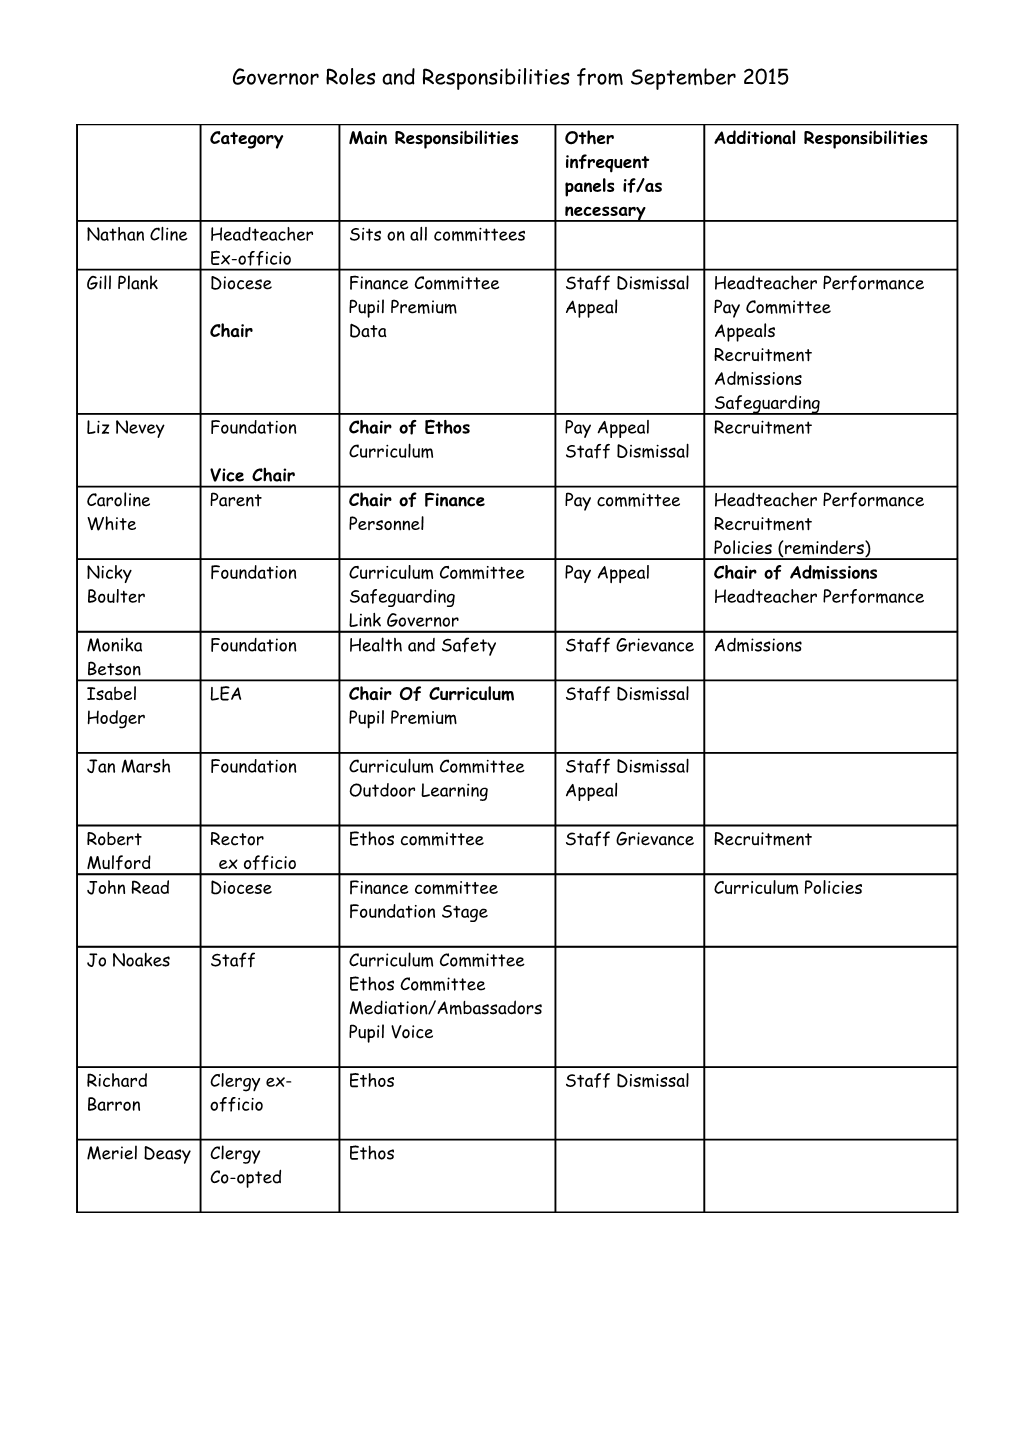 Governor Roles and Responsibilities from September 2015